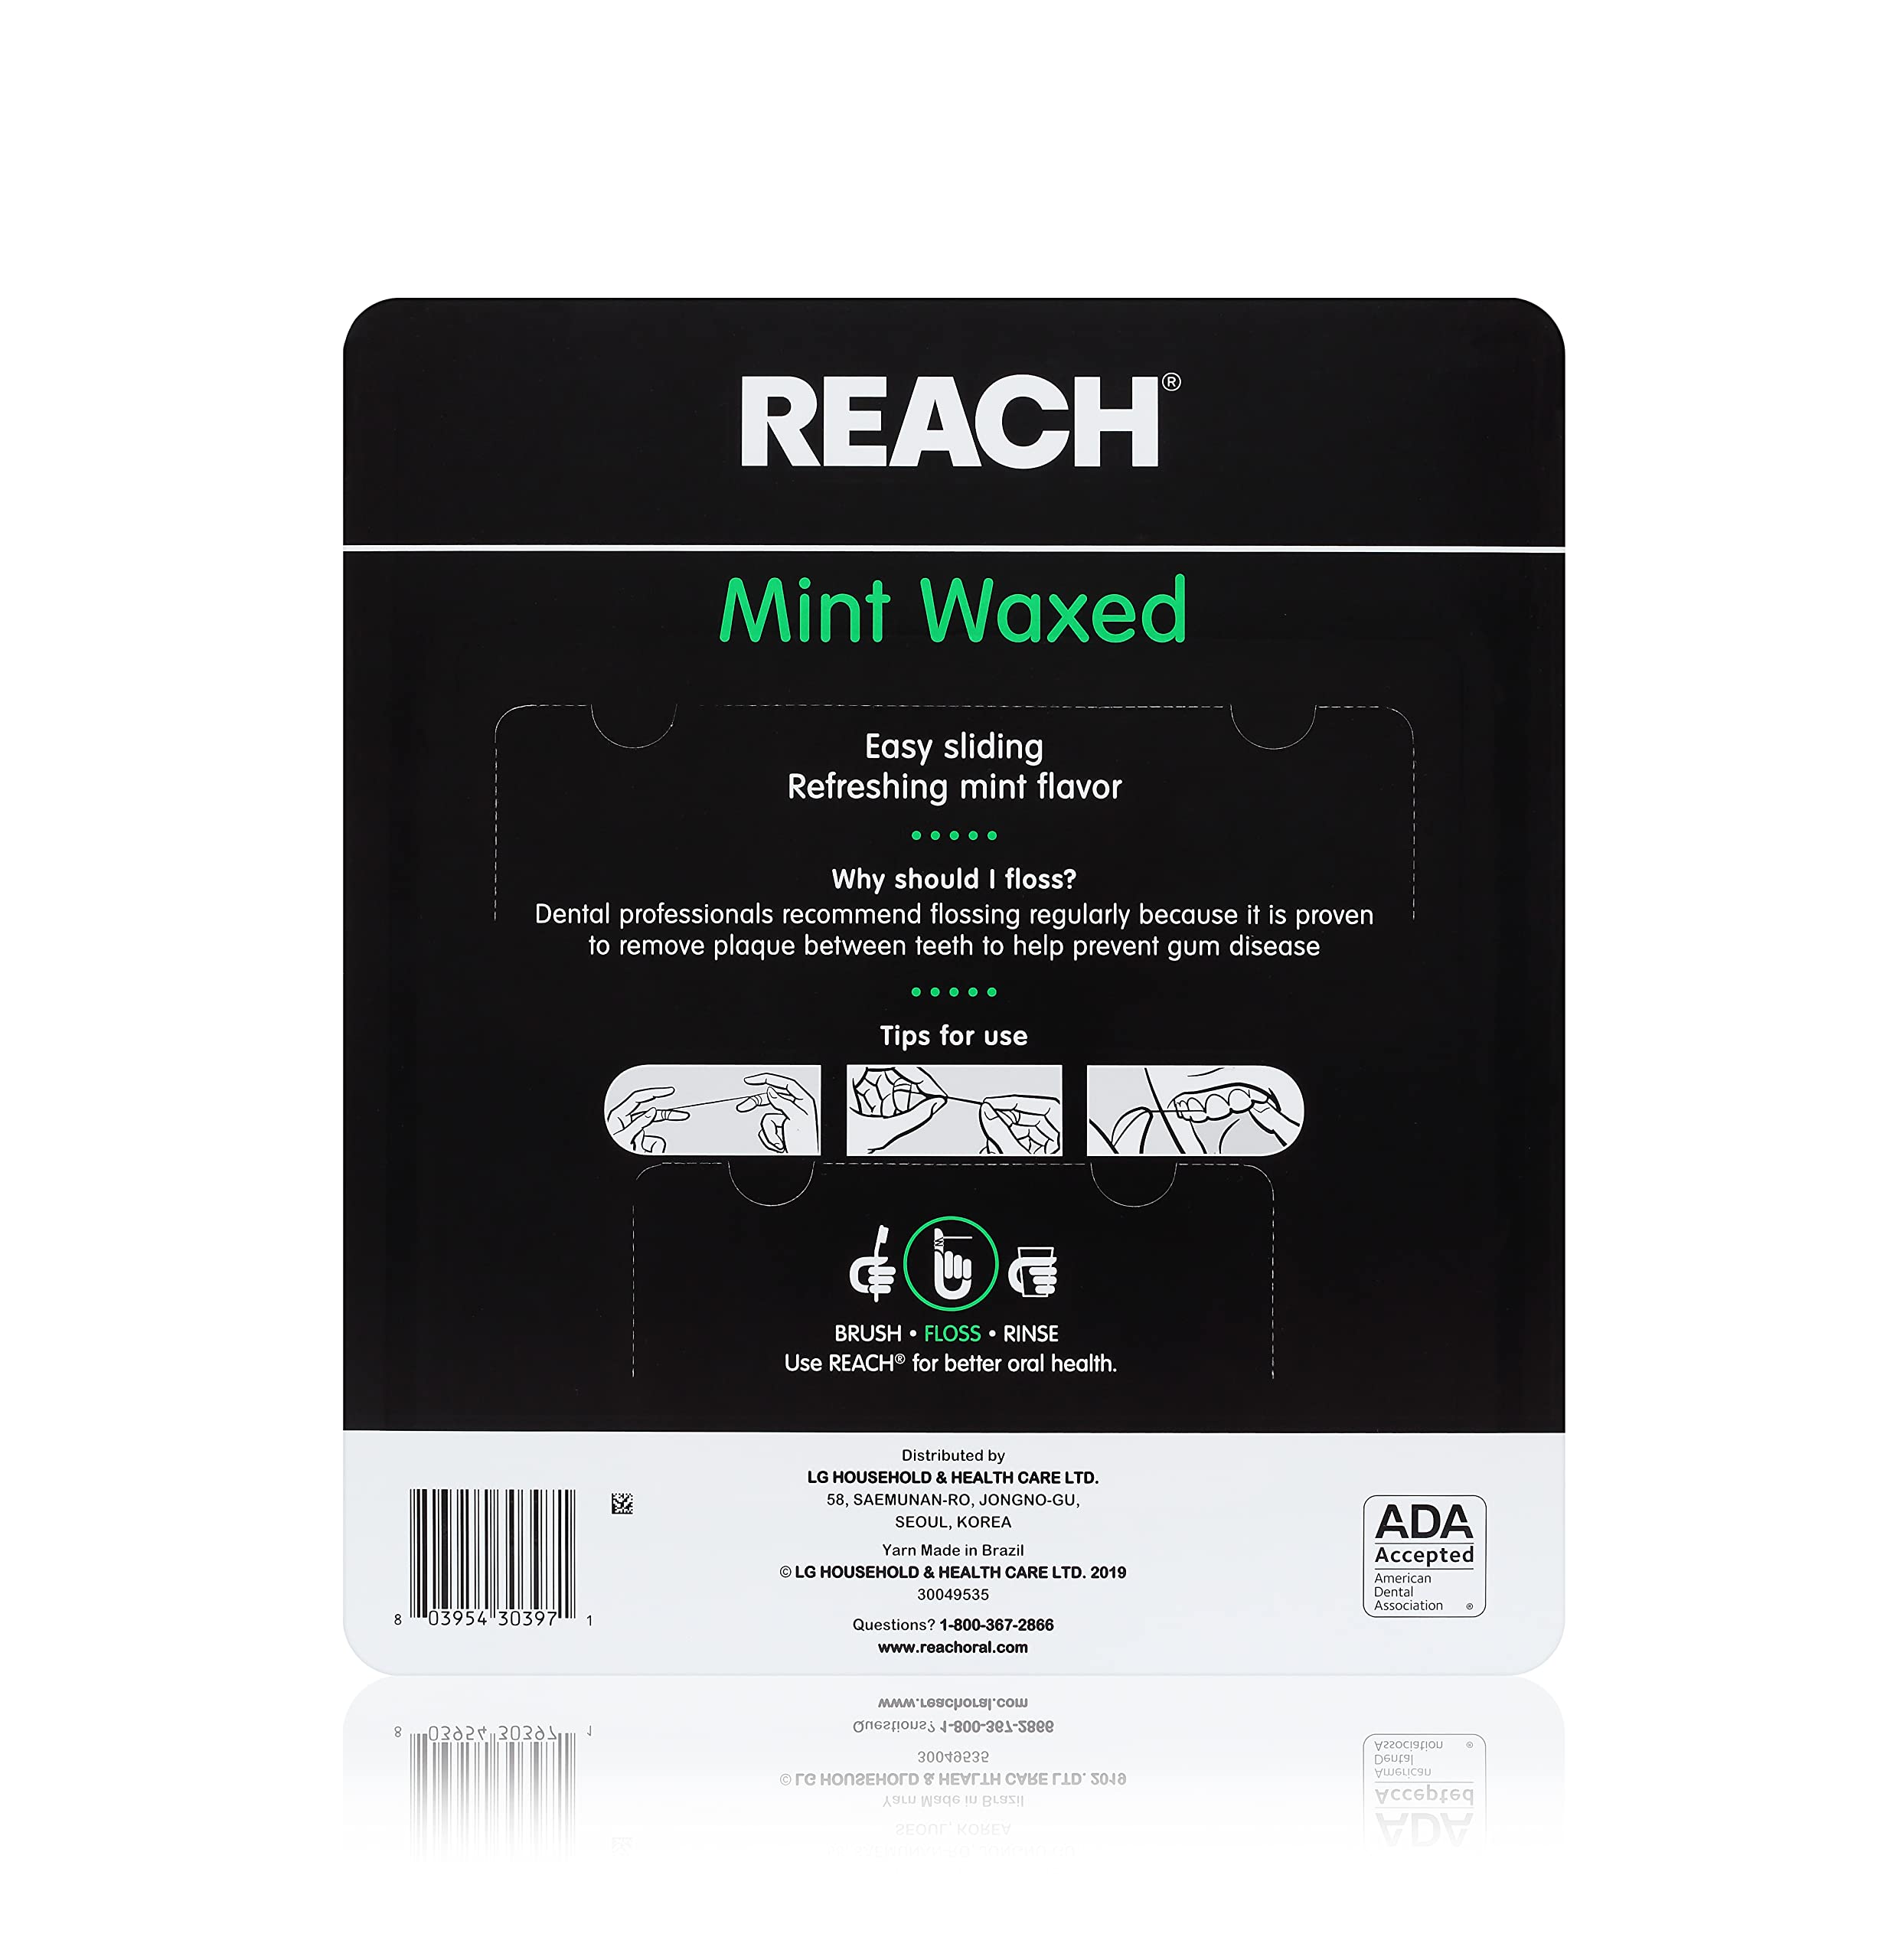 Reach Waxed Dental Floss | Effective Plaque Removal, Extra Wide Cleaning Surface | Shred Resistance & Tension, Slides Smoothly & Easily , PFAS FREE | Mint Flavored, 55 Yards, 1 Pack